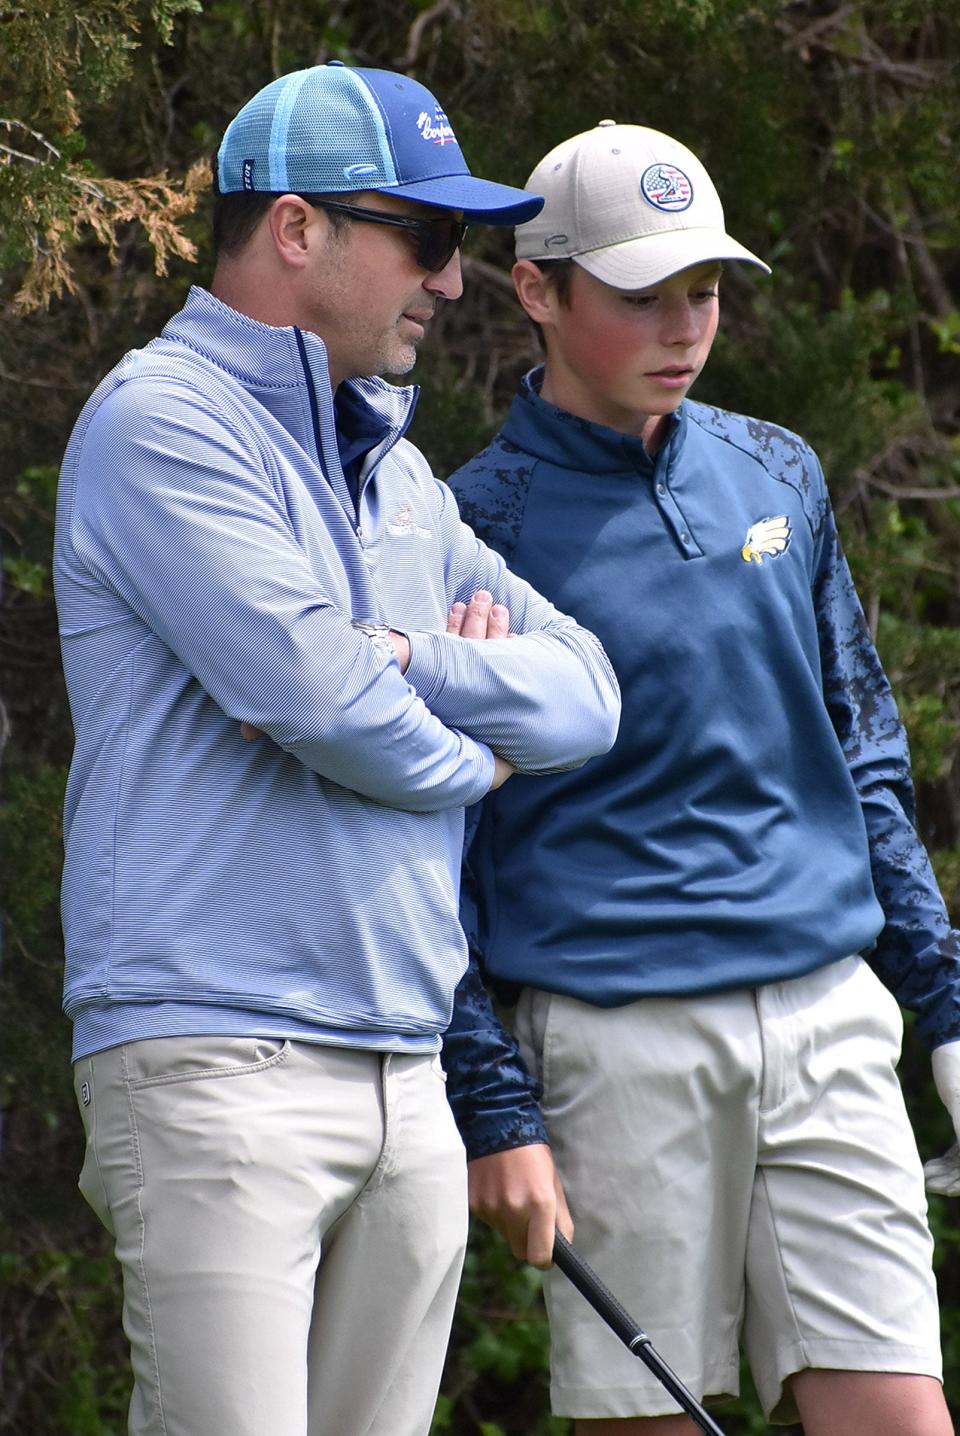 Hartland's Nathan Oake (left), working last season with Keller King, will be inducted into the Michigan Interscholastic Golf Coaches Association Hall of Fame in August.